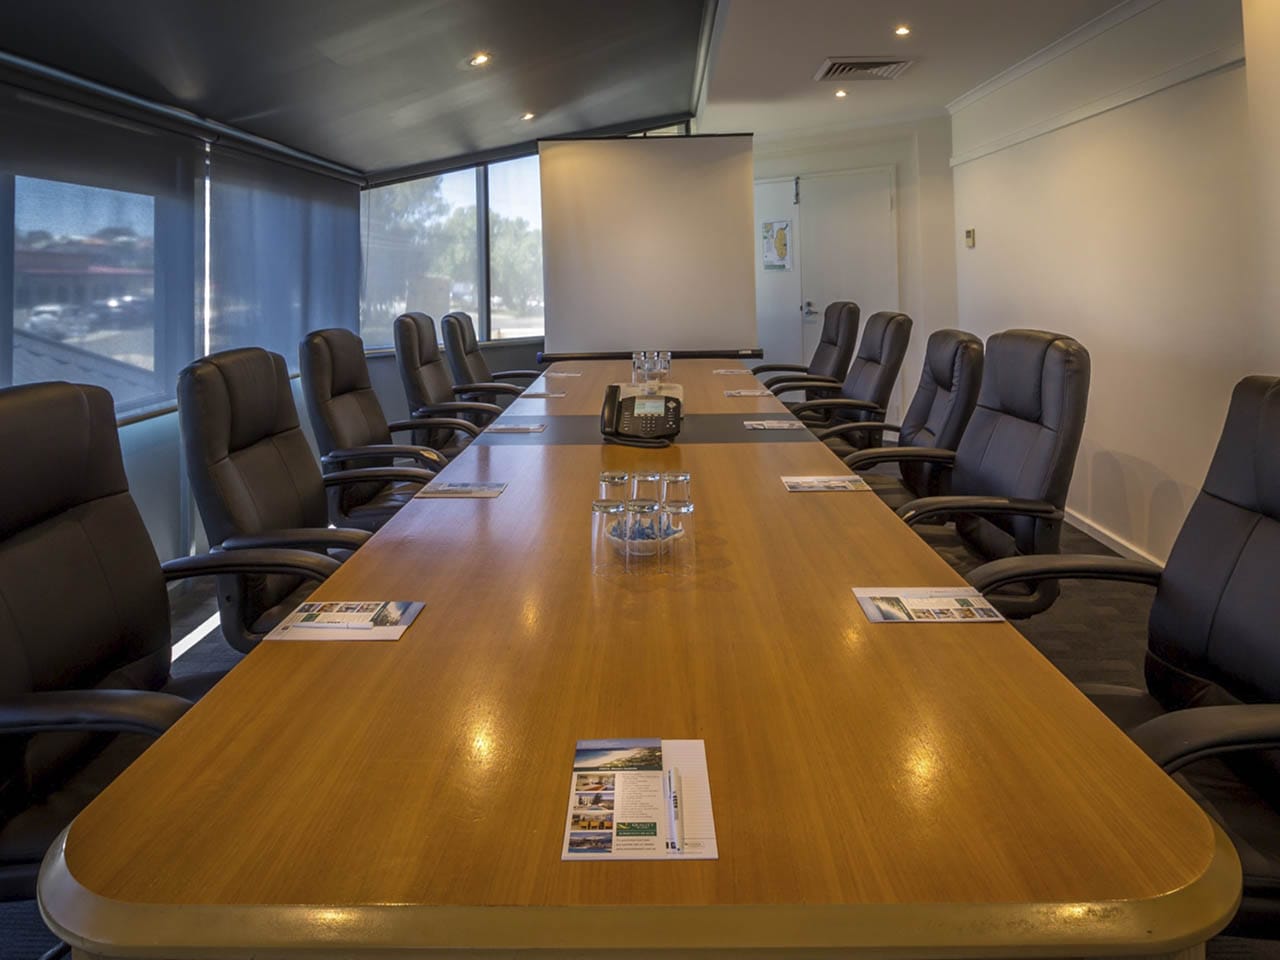 Coporate Meeting Room With Grey Chairs.